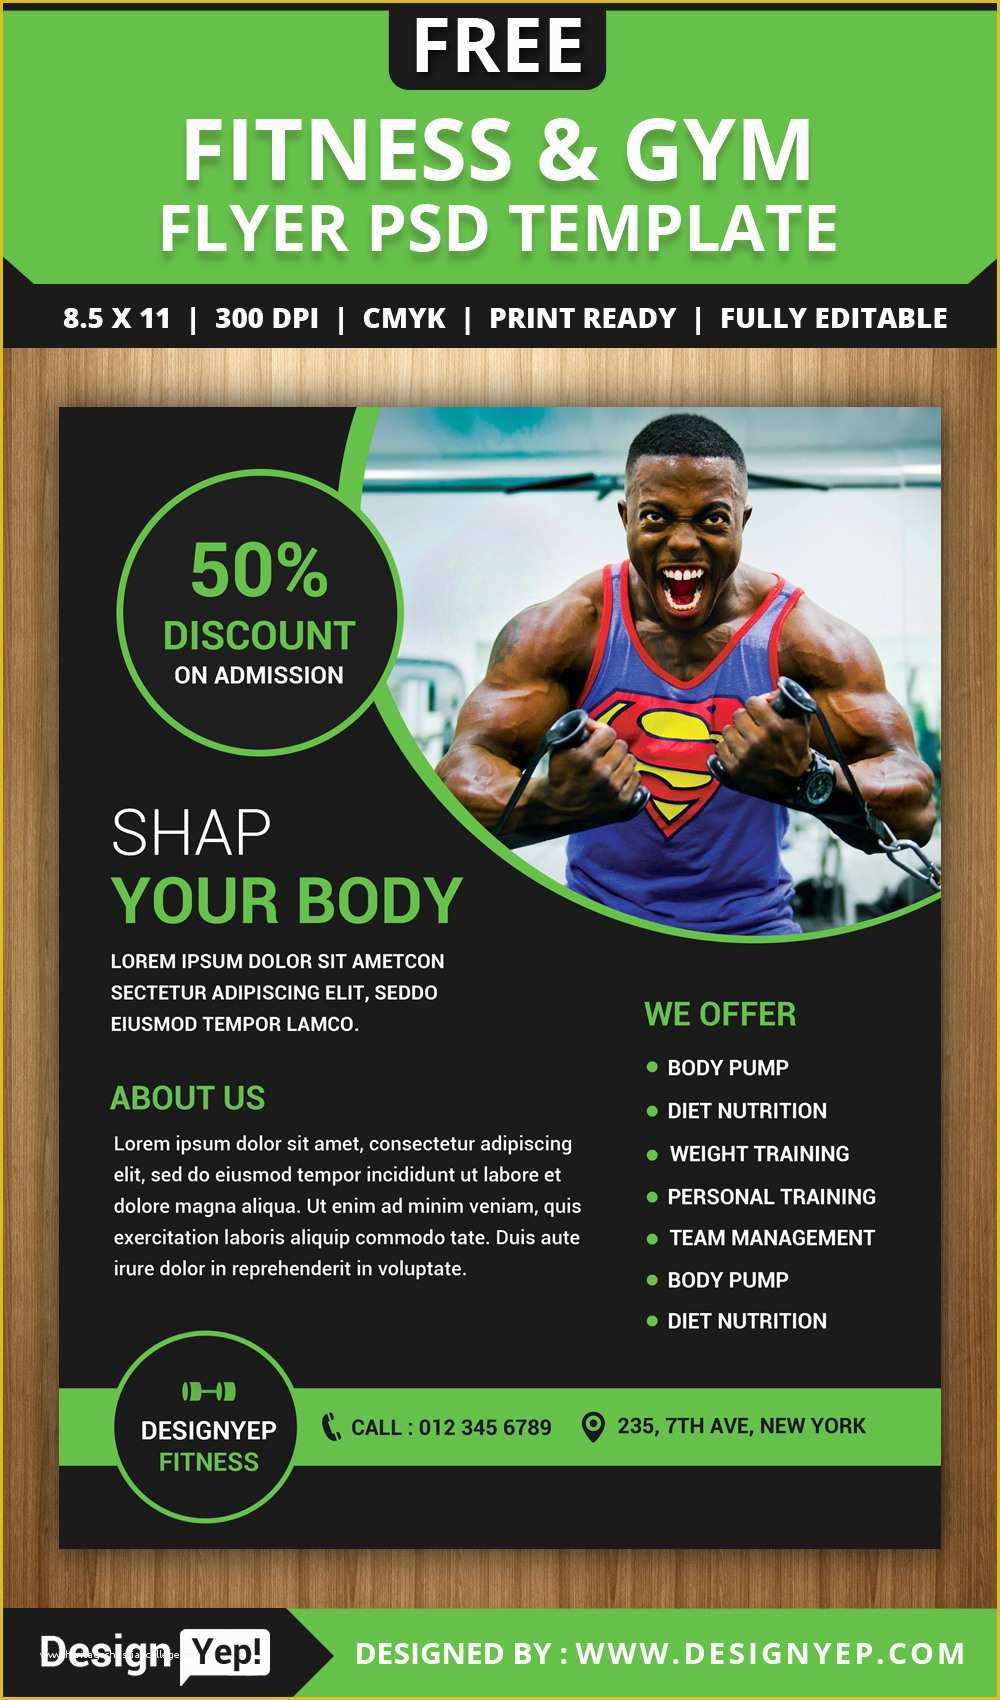 Gym Flyer Template Free Download Of Free Gym and Fitness Flyer Psd Template Designyep